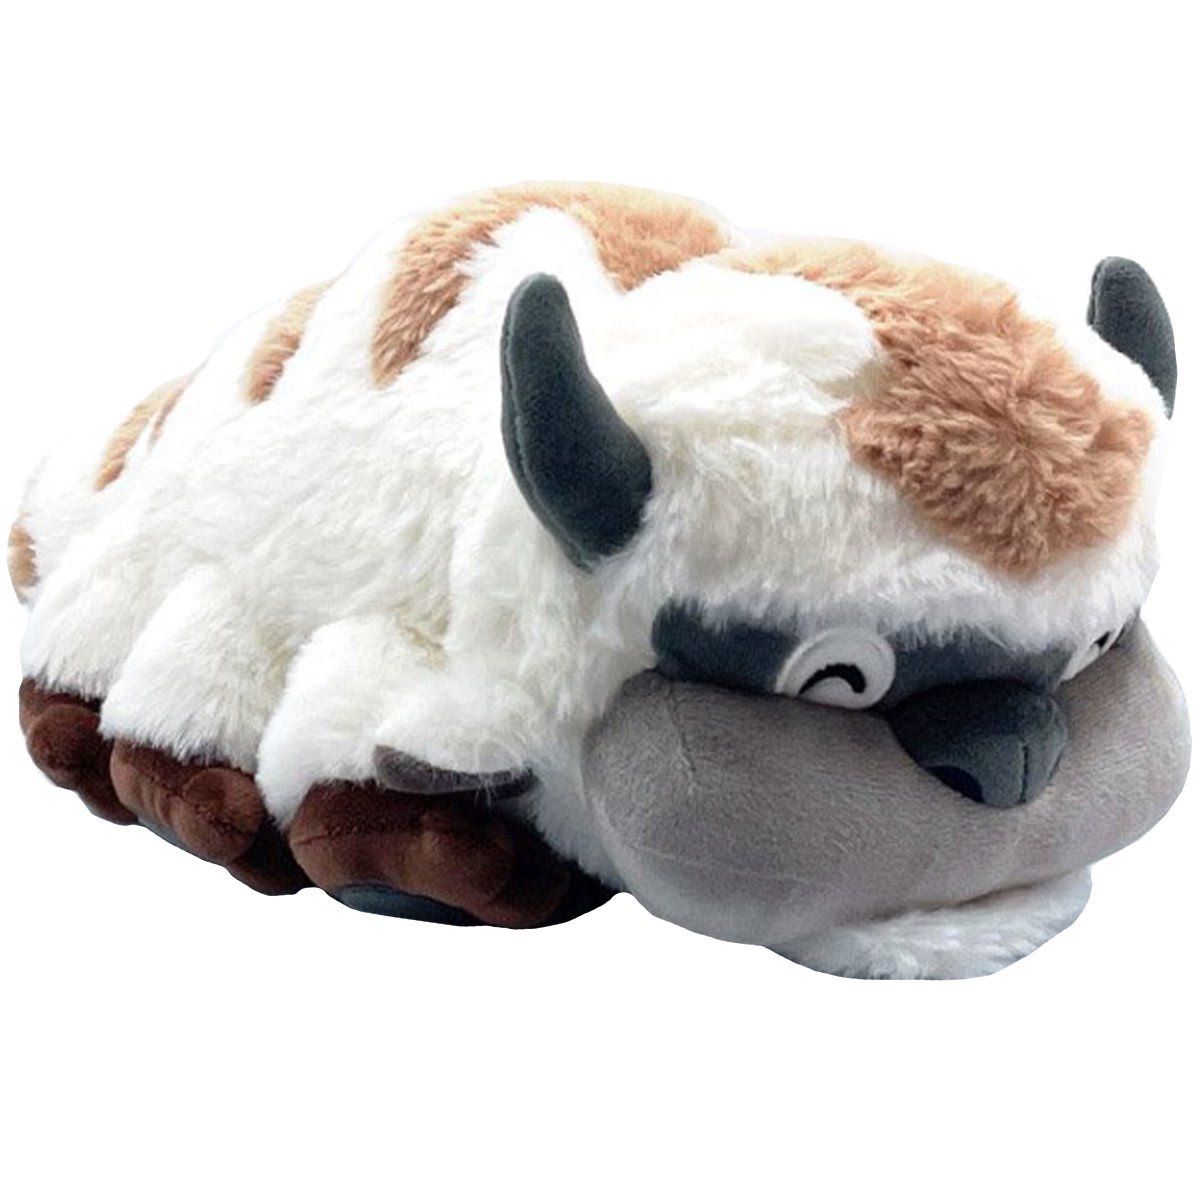 Appa Plush Inspired by Avatar The Last Airbender  Fabro Creations